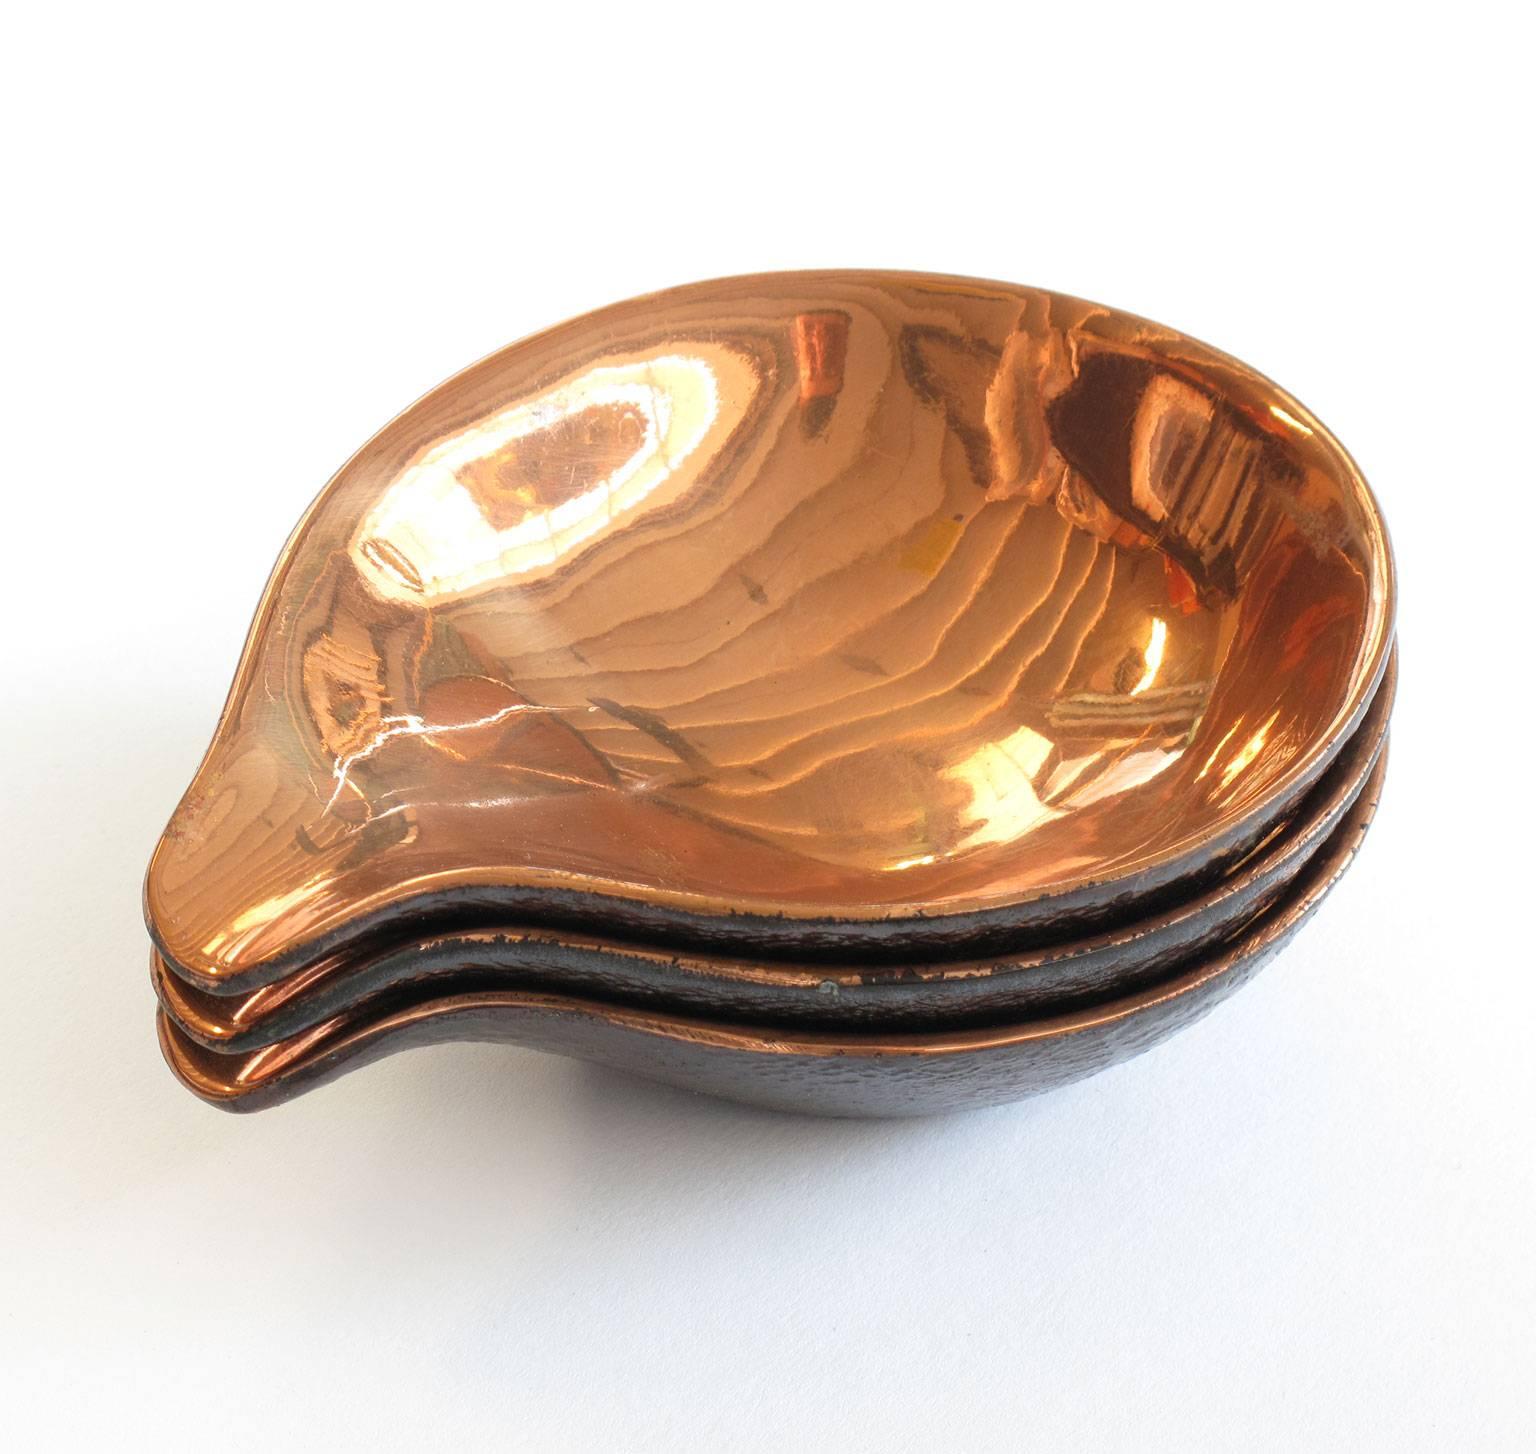 Three biomorphic copper plated metal nesting cups (saucers or ashtrays) designed by Ben Seibel, 1950s, each measures 1 high x 3.75 wide x 4.5 deep inches, Jenfred Ware, New York, excellent vintage condition, copper shines and reflects nicely,